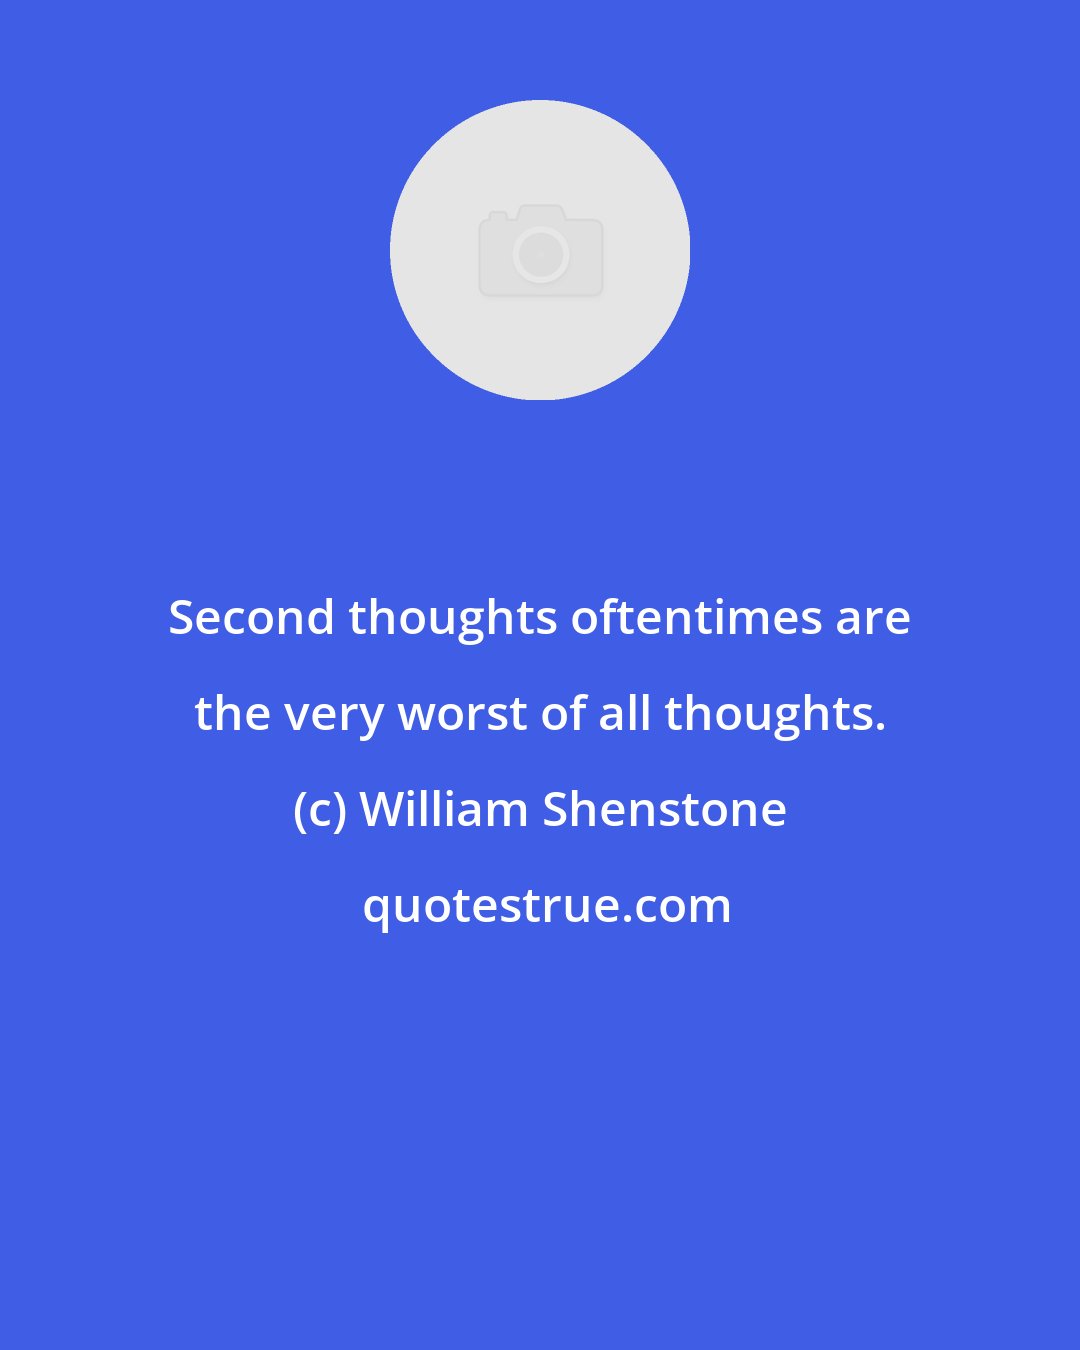 William Shenstone: Second thoughts oftentimes are the very worst of all thoughts.